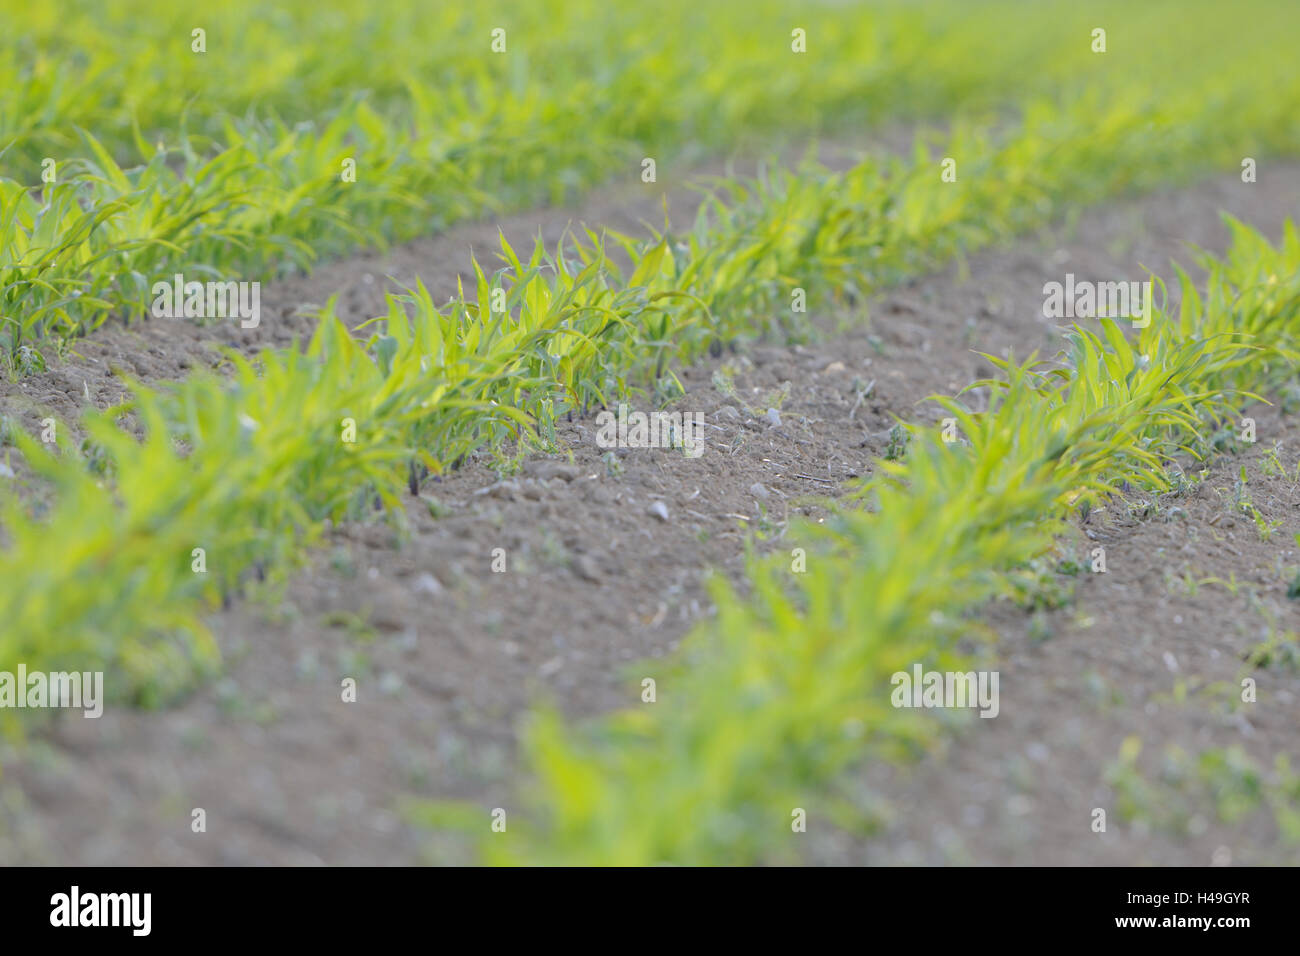 Corn field, seedlings, maize field, agriculture, cultivation, country living, detail, ground, field economy, fertile, grain, grain-field, grain field, cultivated plant, agriculture, maize, maize cultivation, maize plants, samples, useful plants, plants, s Stock Photo